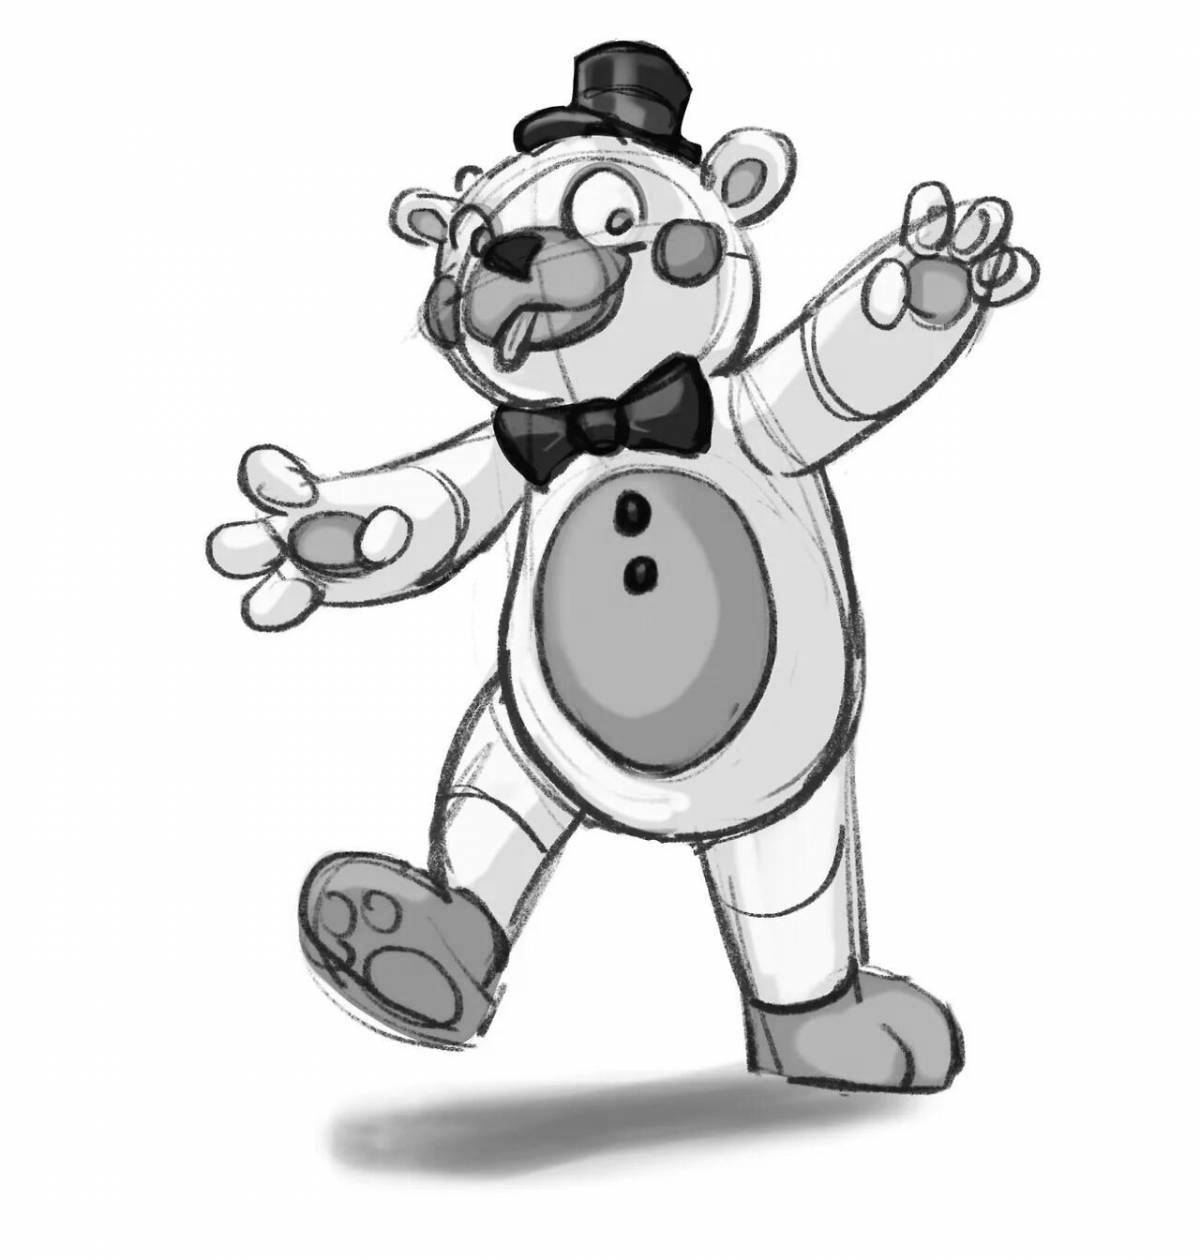 Great helpy coloring book